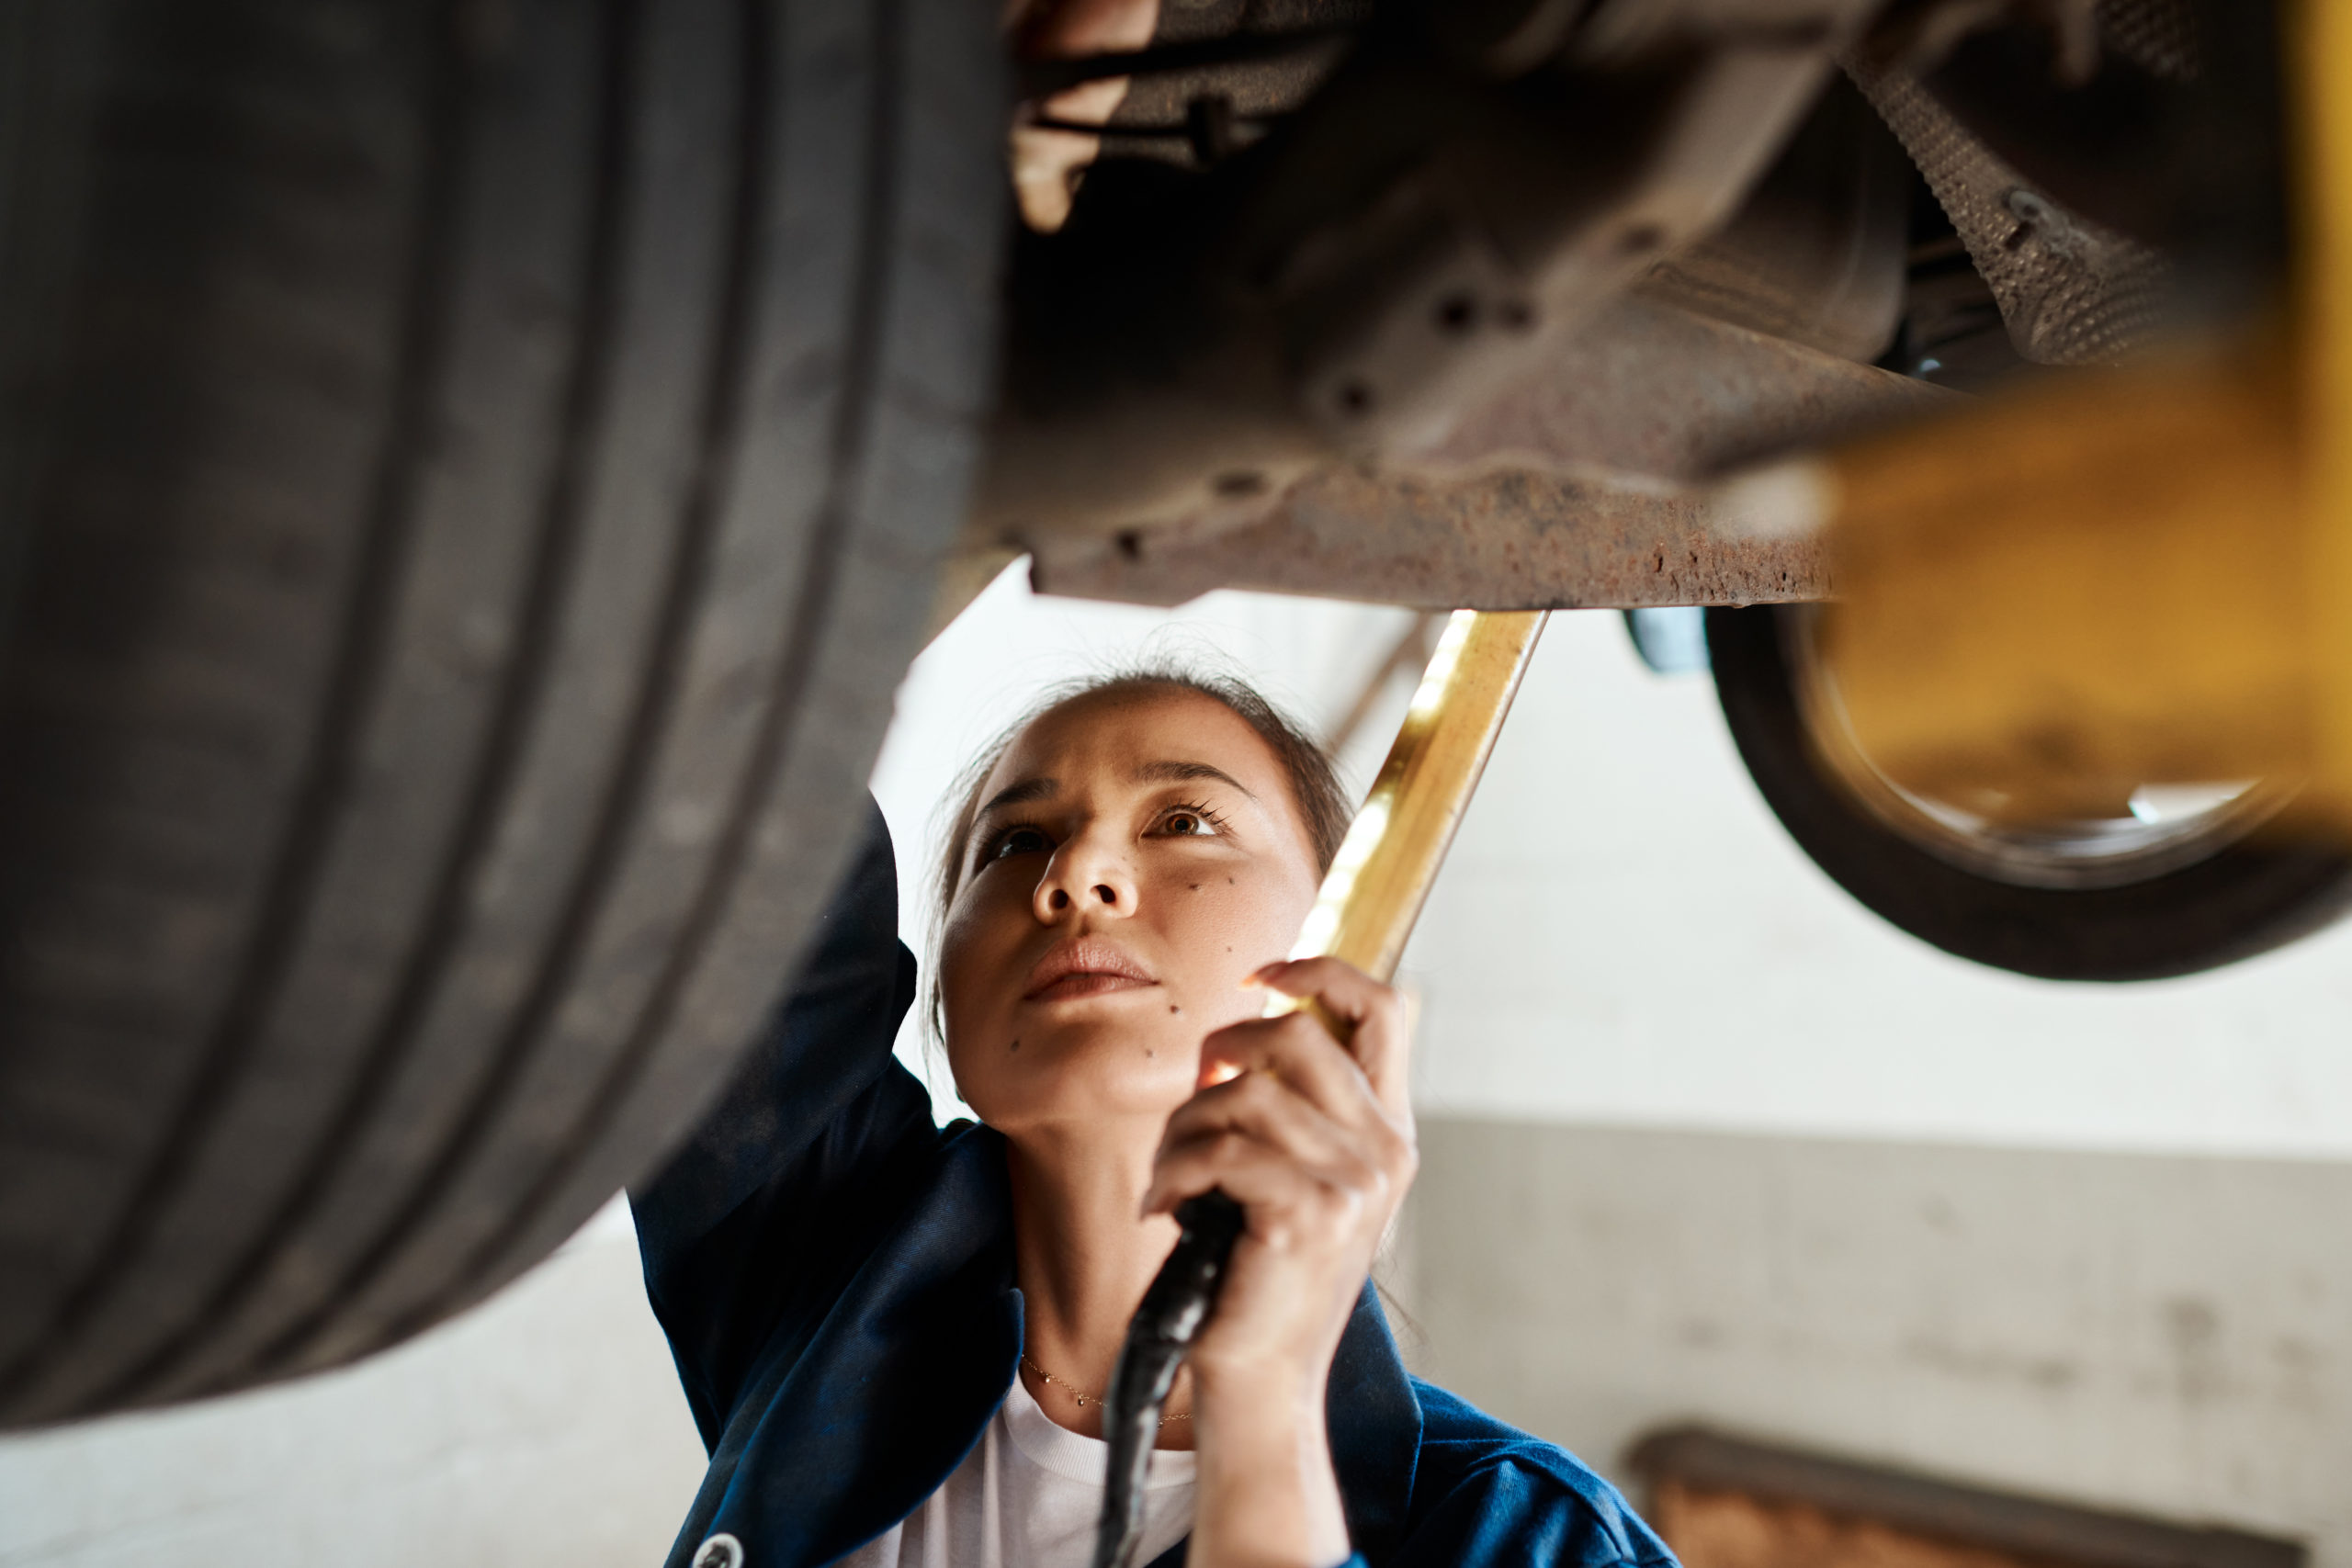 https://autolab.com.co/wp-content/uploads/shot-of-a-female-mechanic-working-under-a-lifted-c-2022-11-23-19-38-29-utc-scaled.jpg